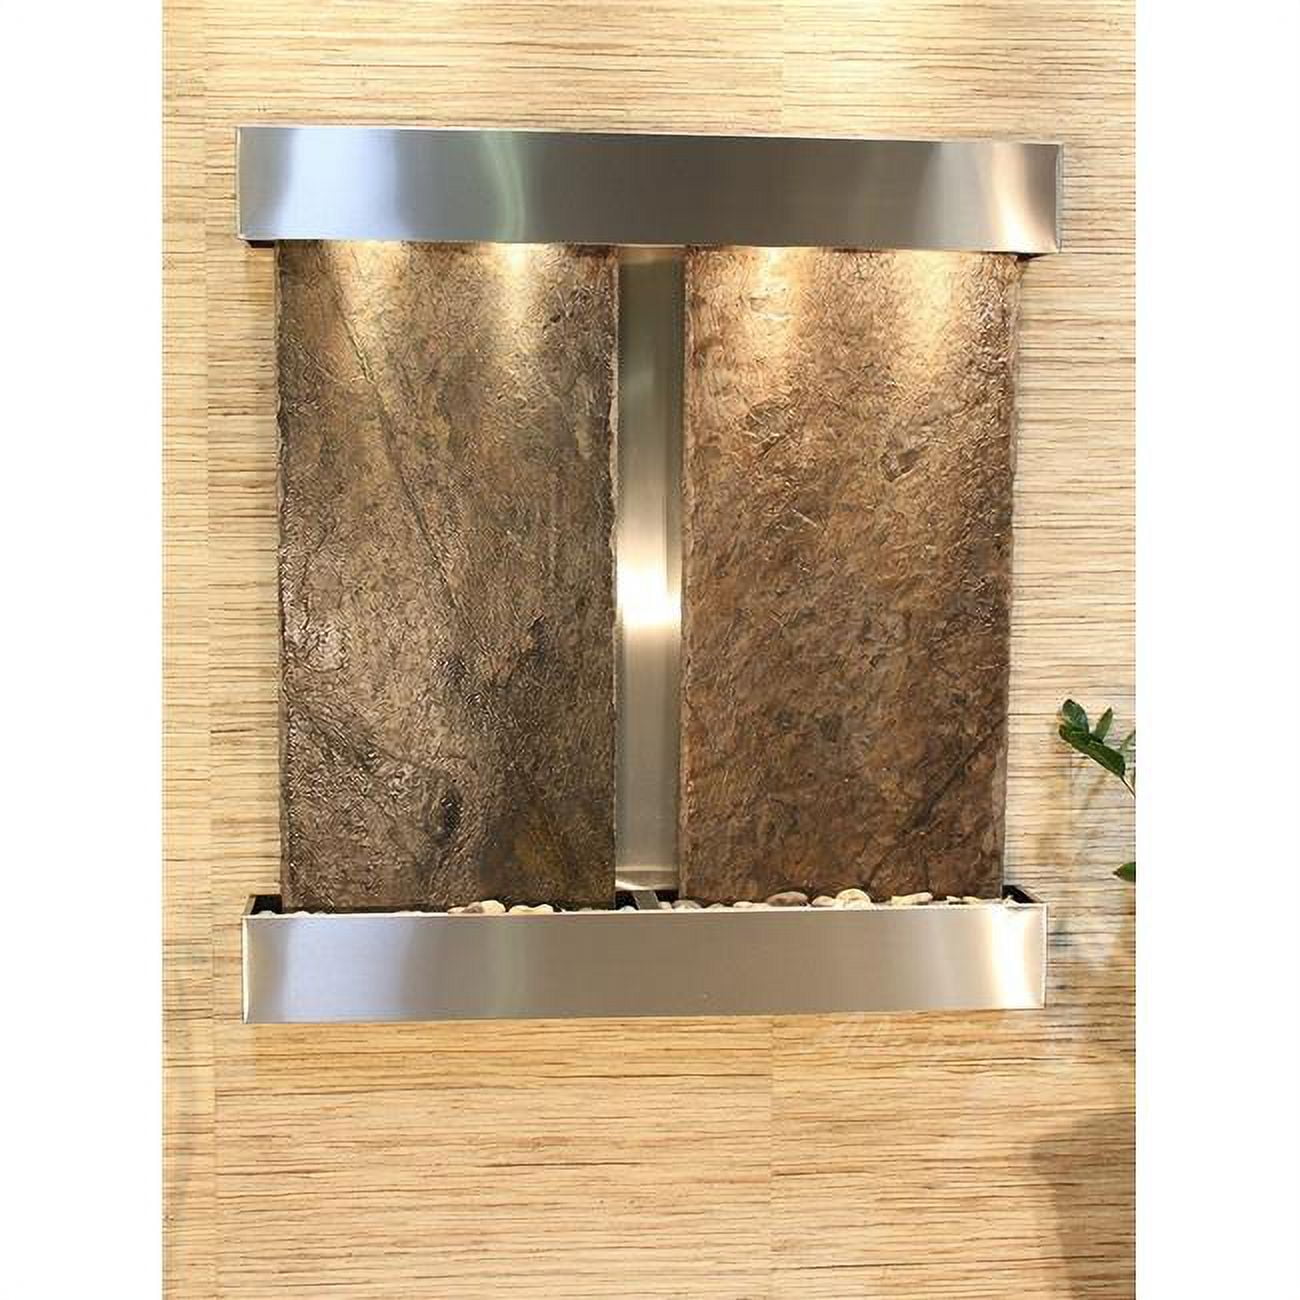 Picture of Adagio AFS2002 Aspen Falls Square Wall Fountain - Stainless Steel-Green Natural Slate